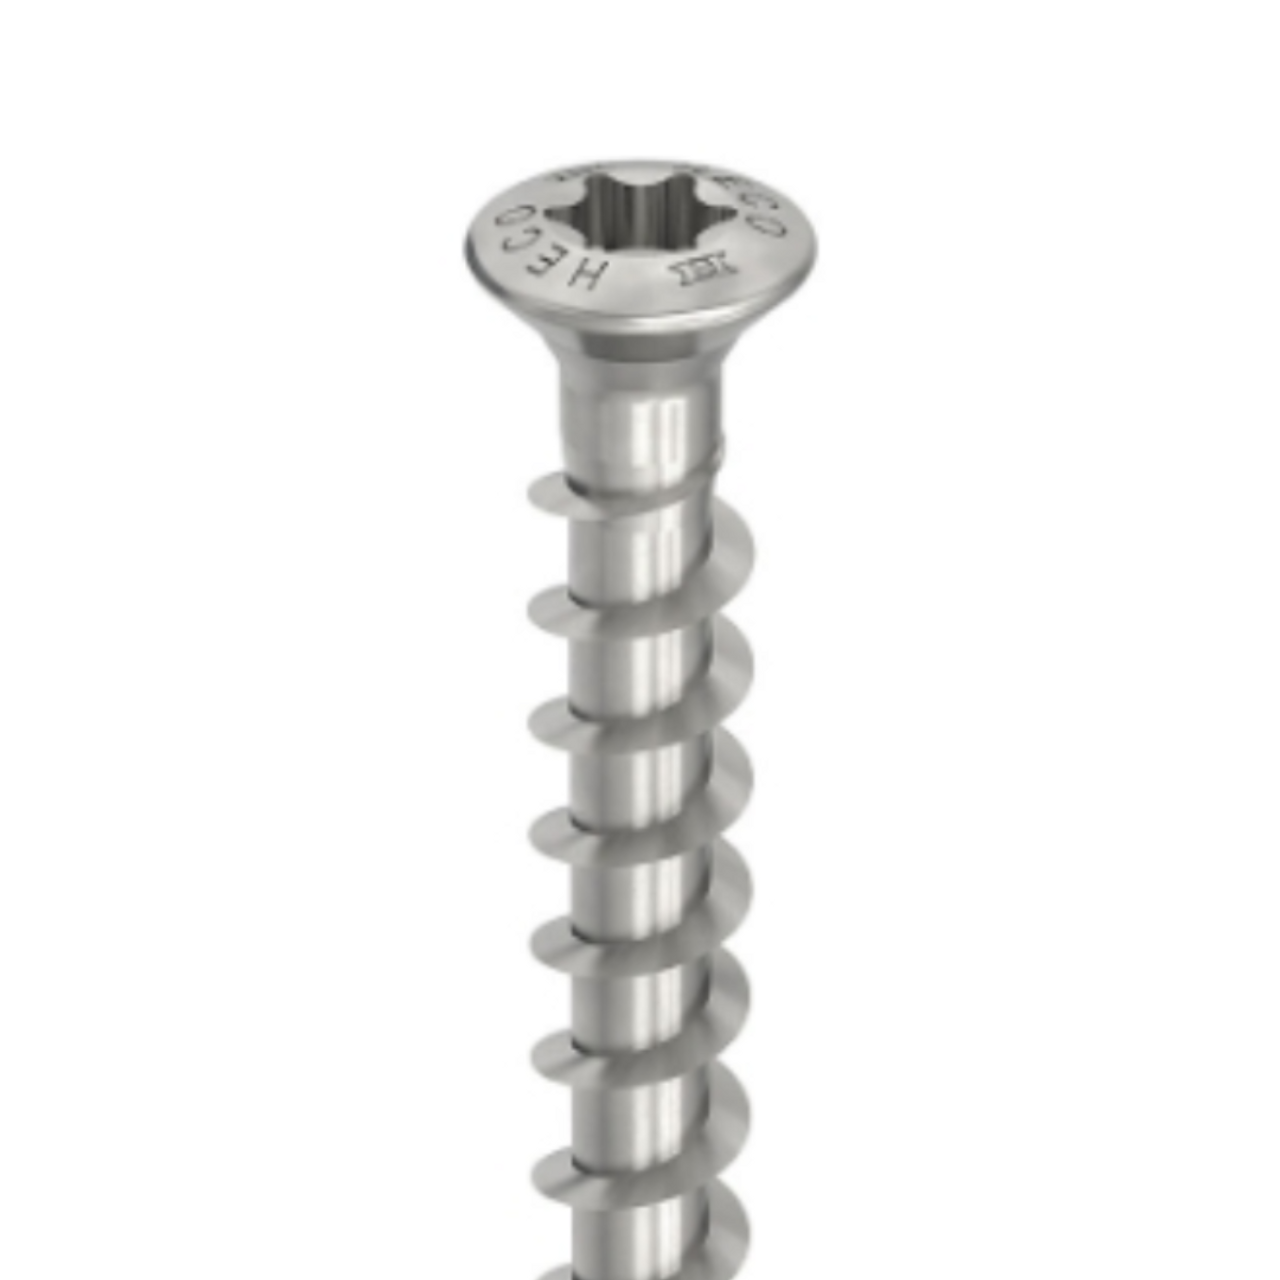 HECO A2 304 Stainless Steel Raised Countersunk Head Screws | Raised Countersunk Head Screws for Carpentry Screws, Hardwood Cladding in Geelong and Surf Coast.